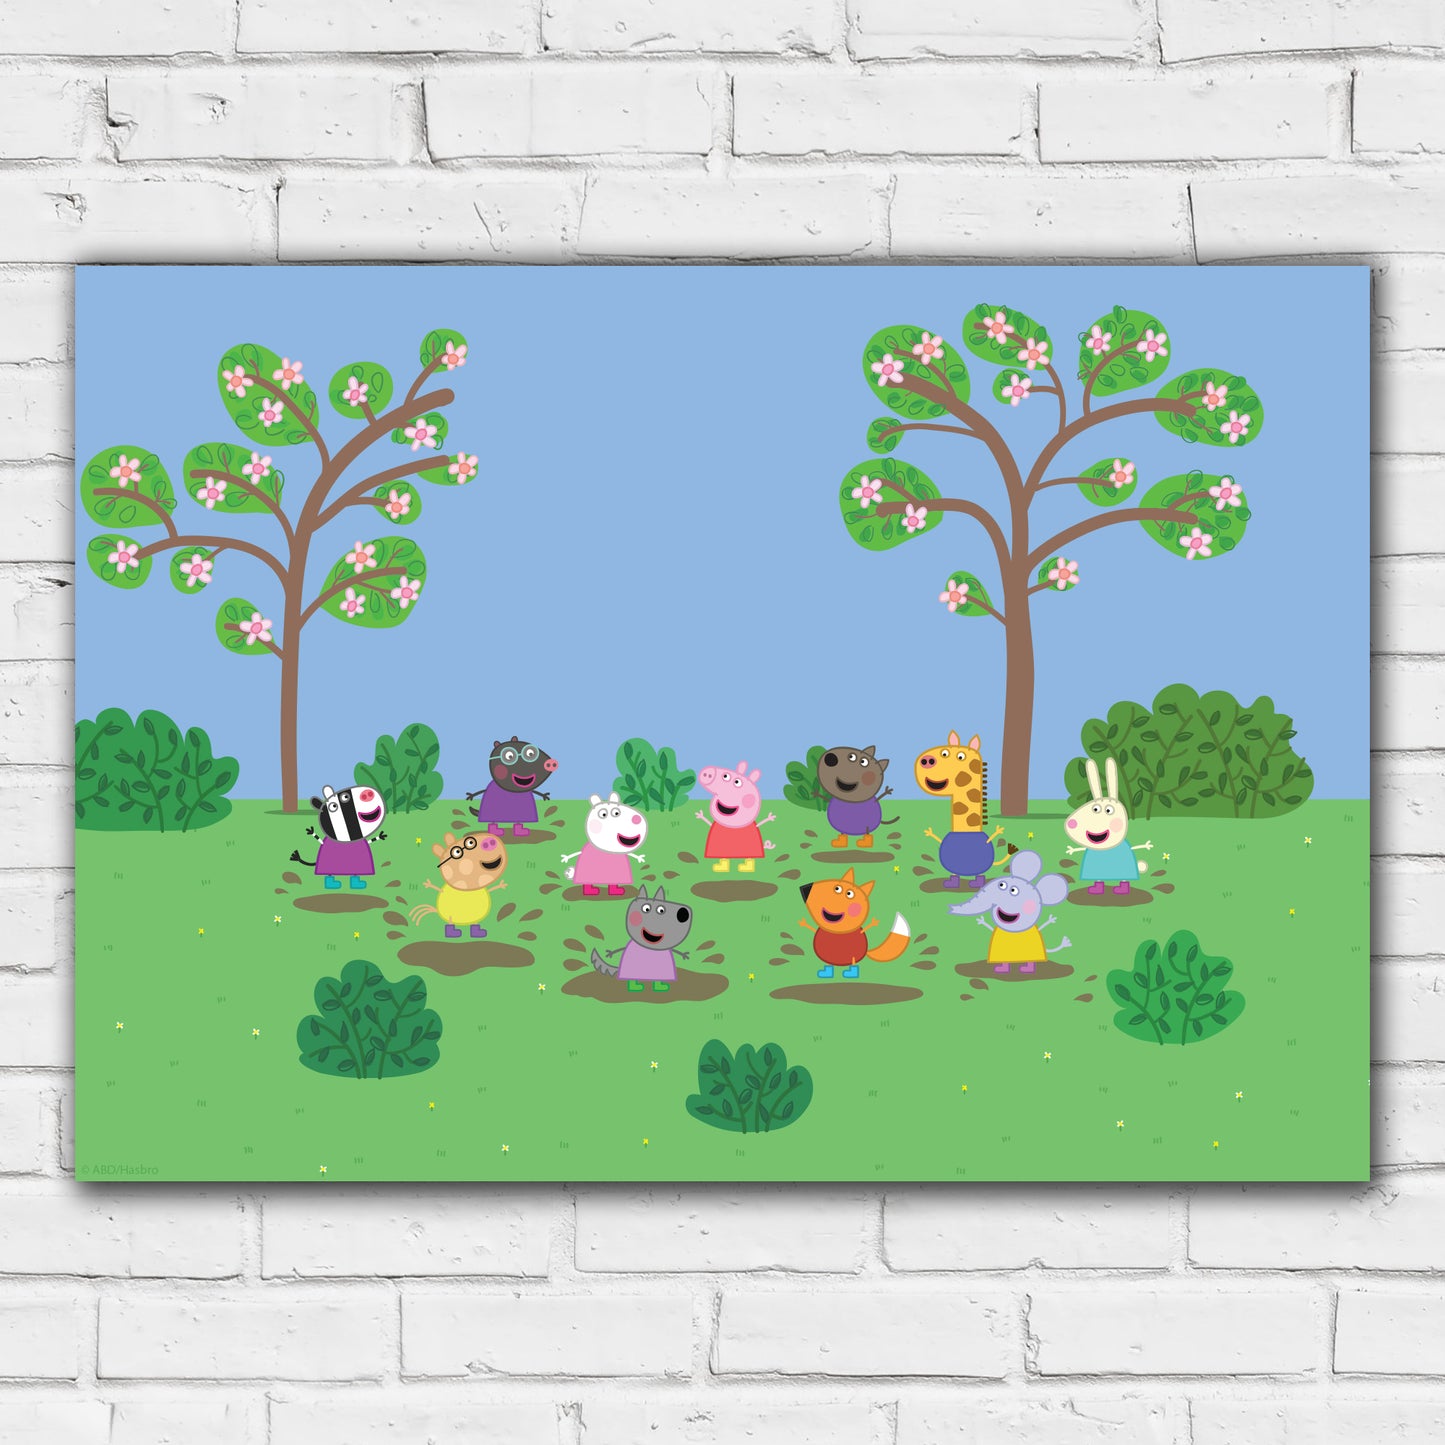 Peppa Pig Print - Peppa and Friends Jumping In Muddy Puddles Scene Poster Wall Art